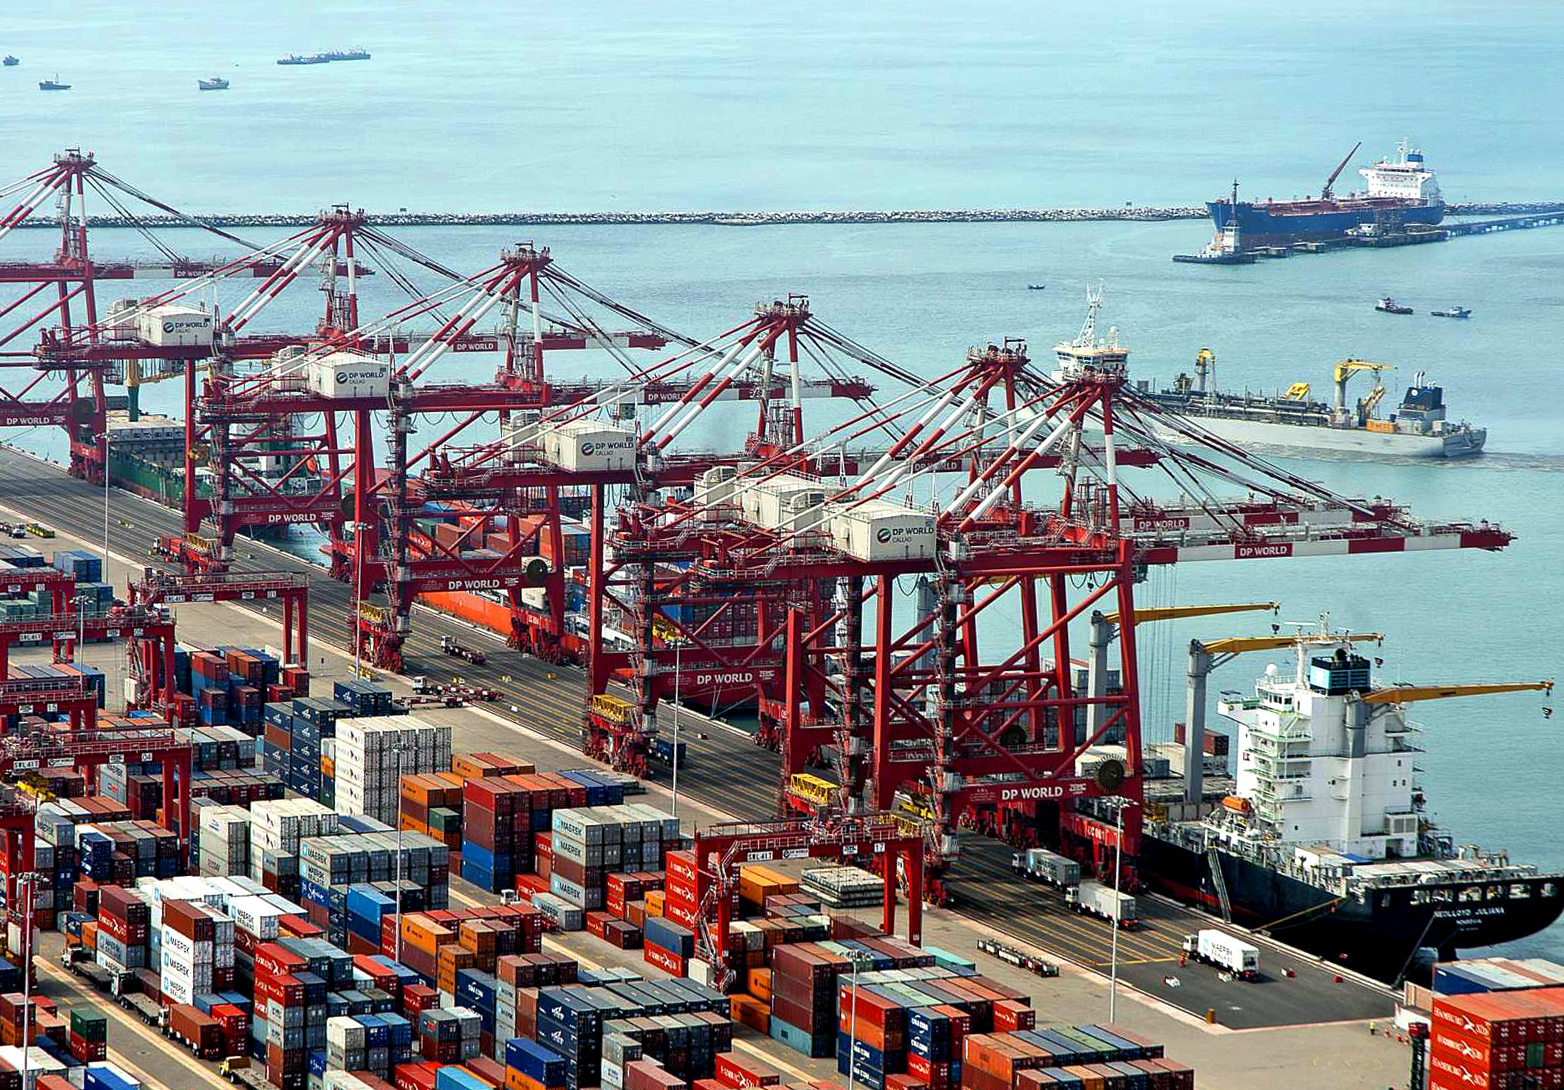 Jeddah Islamic Port sets new container record in October